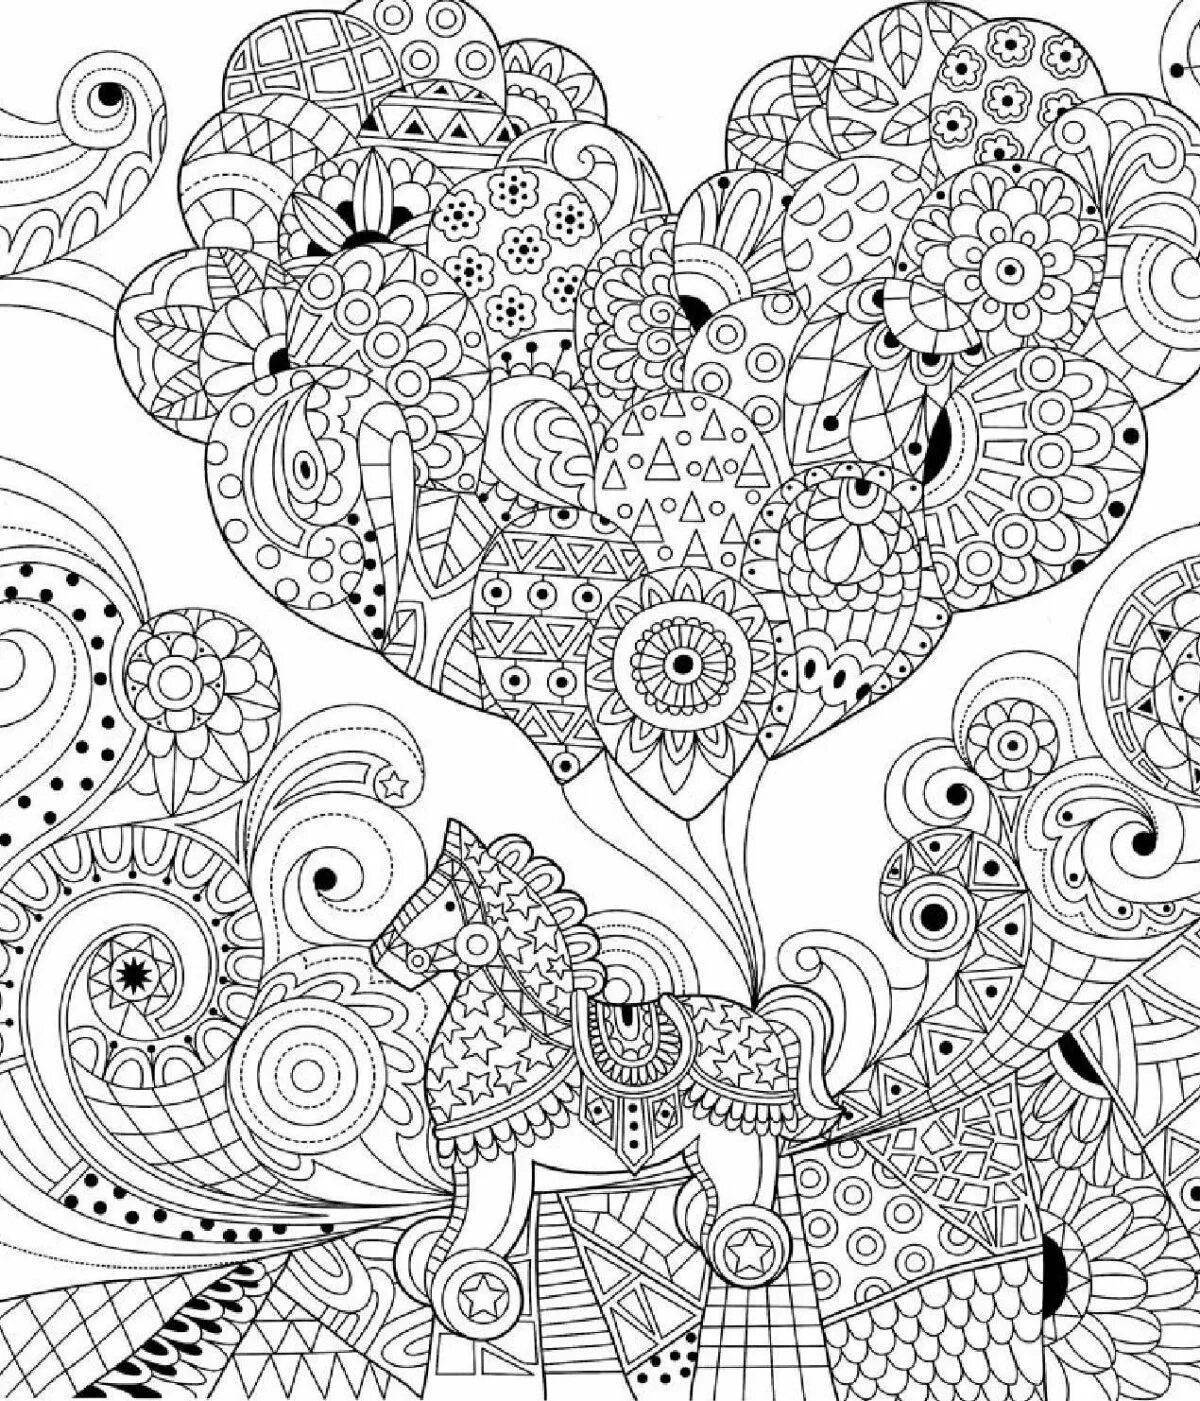 Coloring book charming anti-stress art therapy